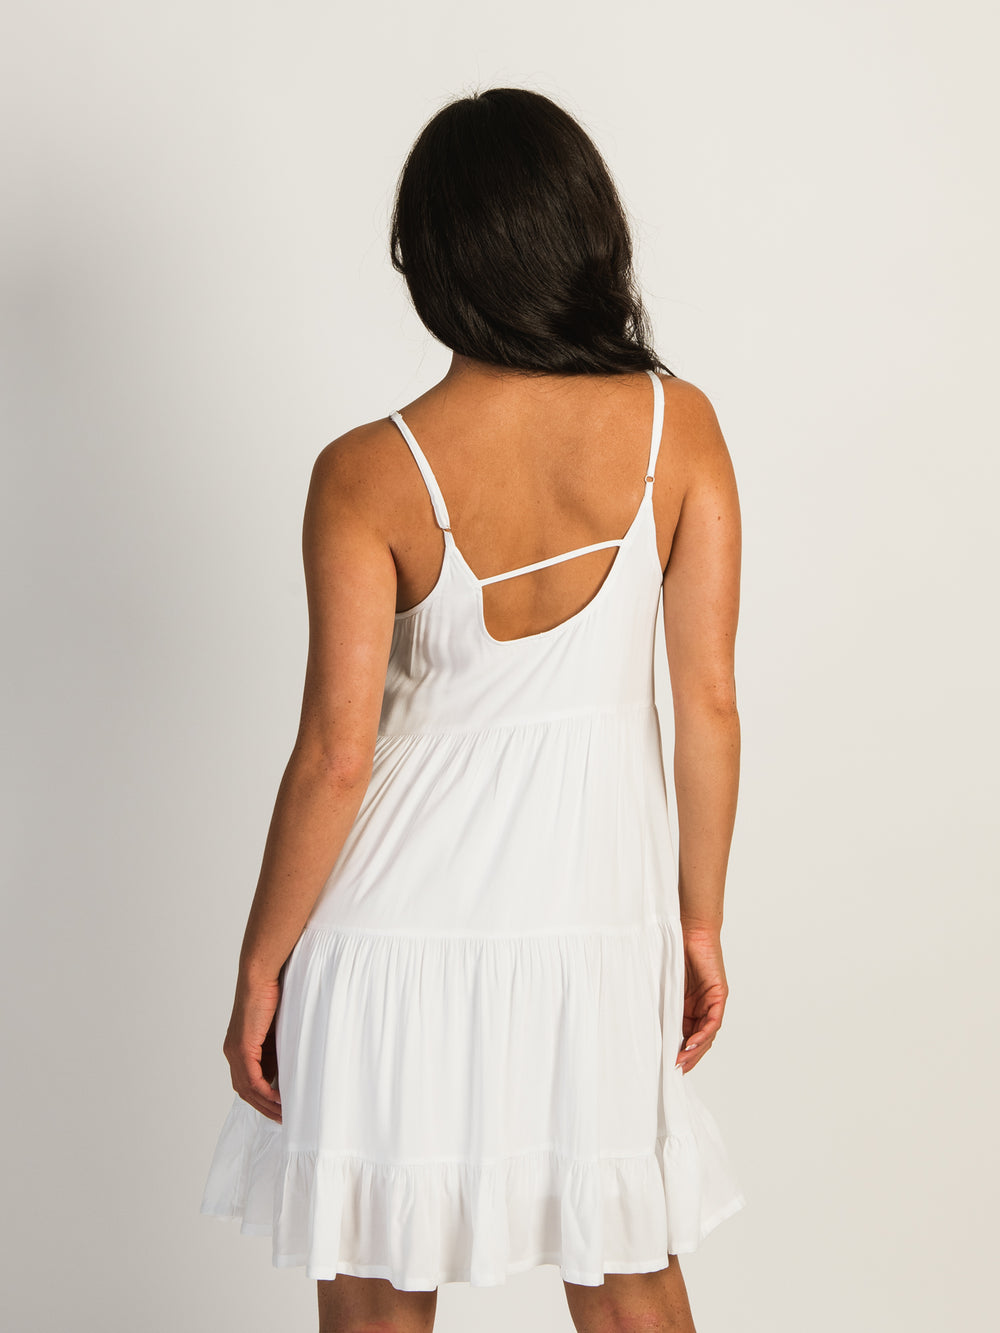 HARLOW TIERED LINED DRESS - WHITE